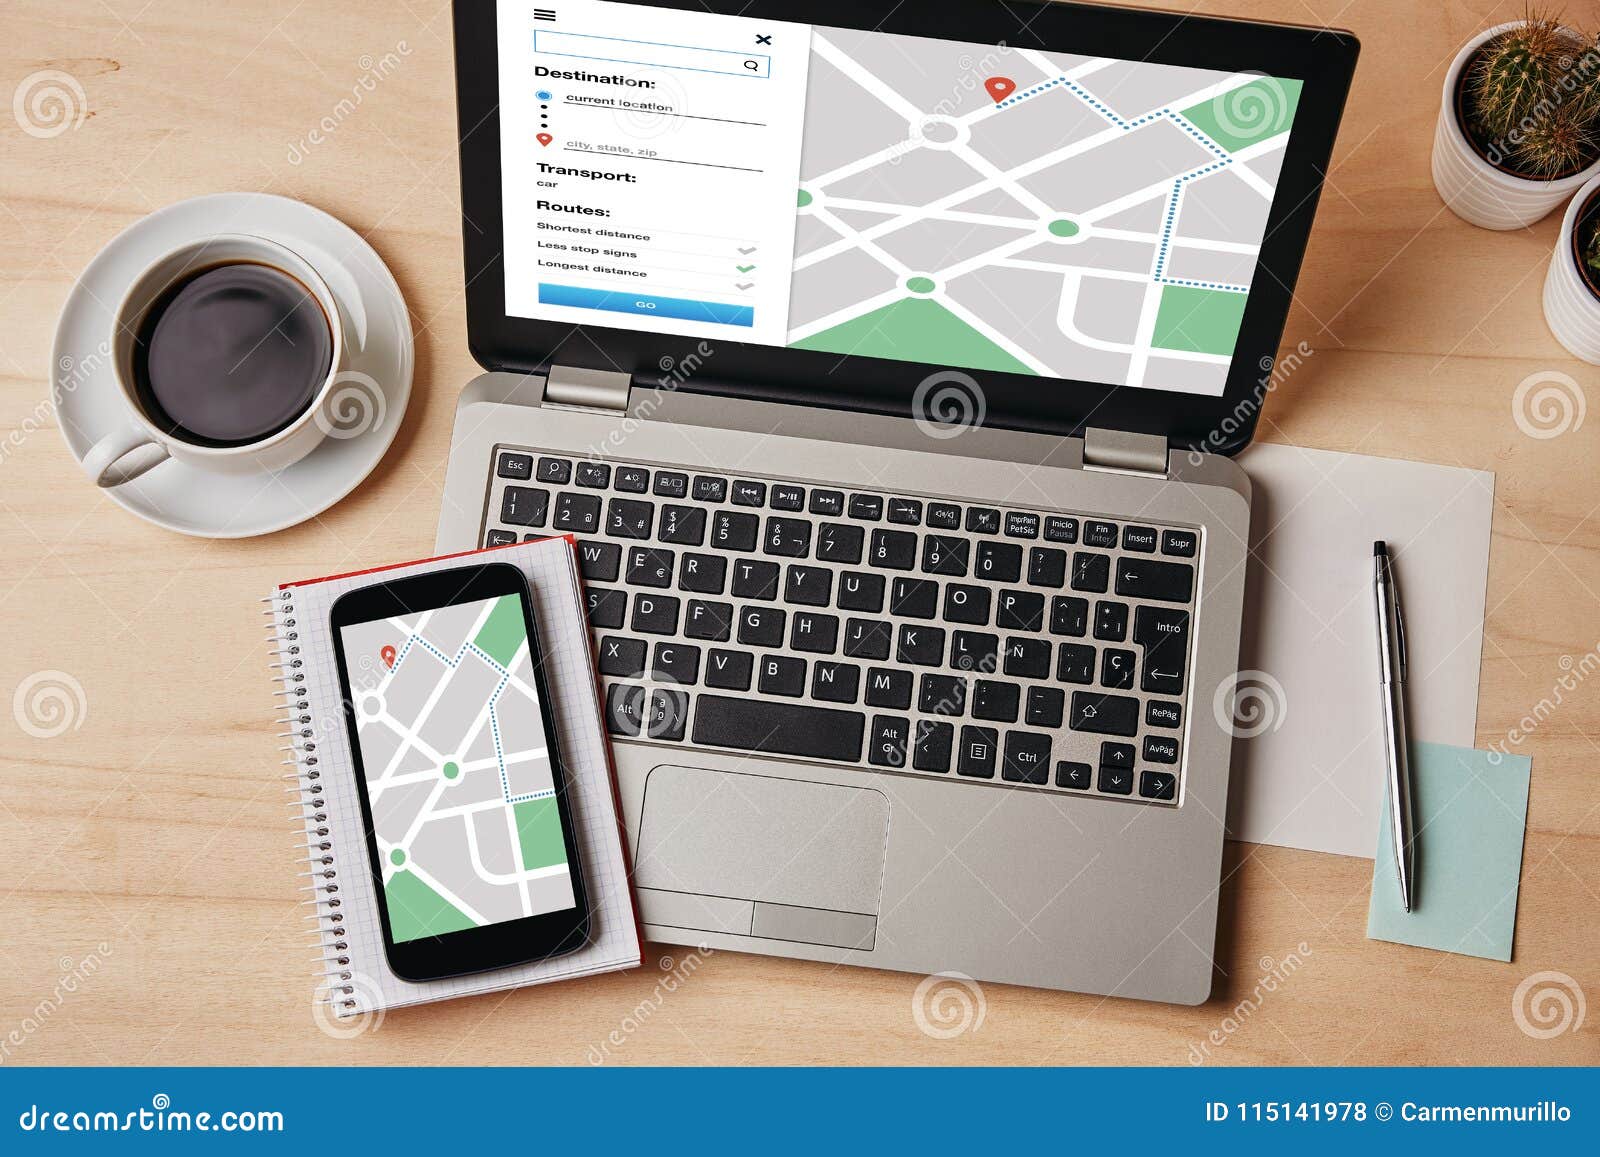 gps map navigation app on laptop and smartphone screen. location